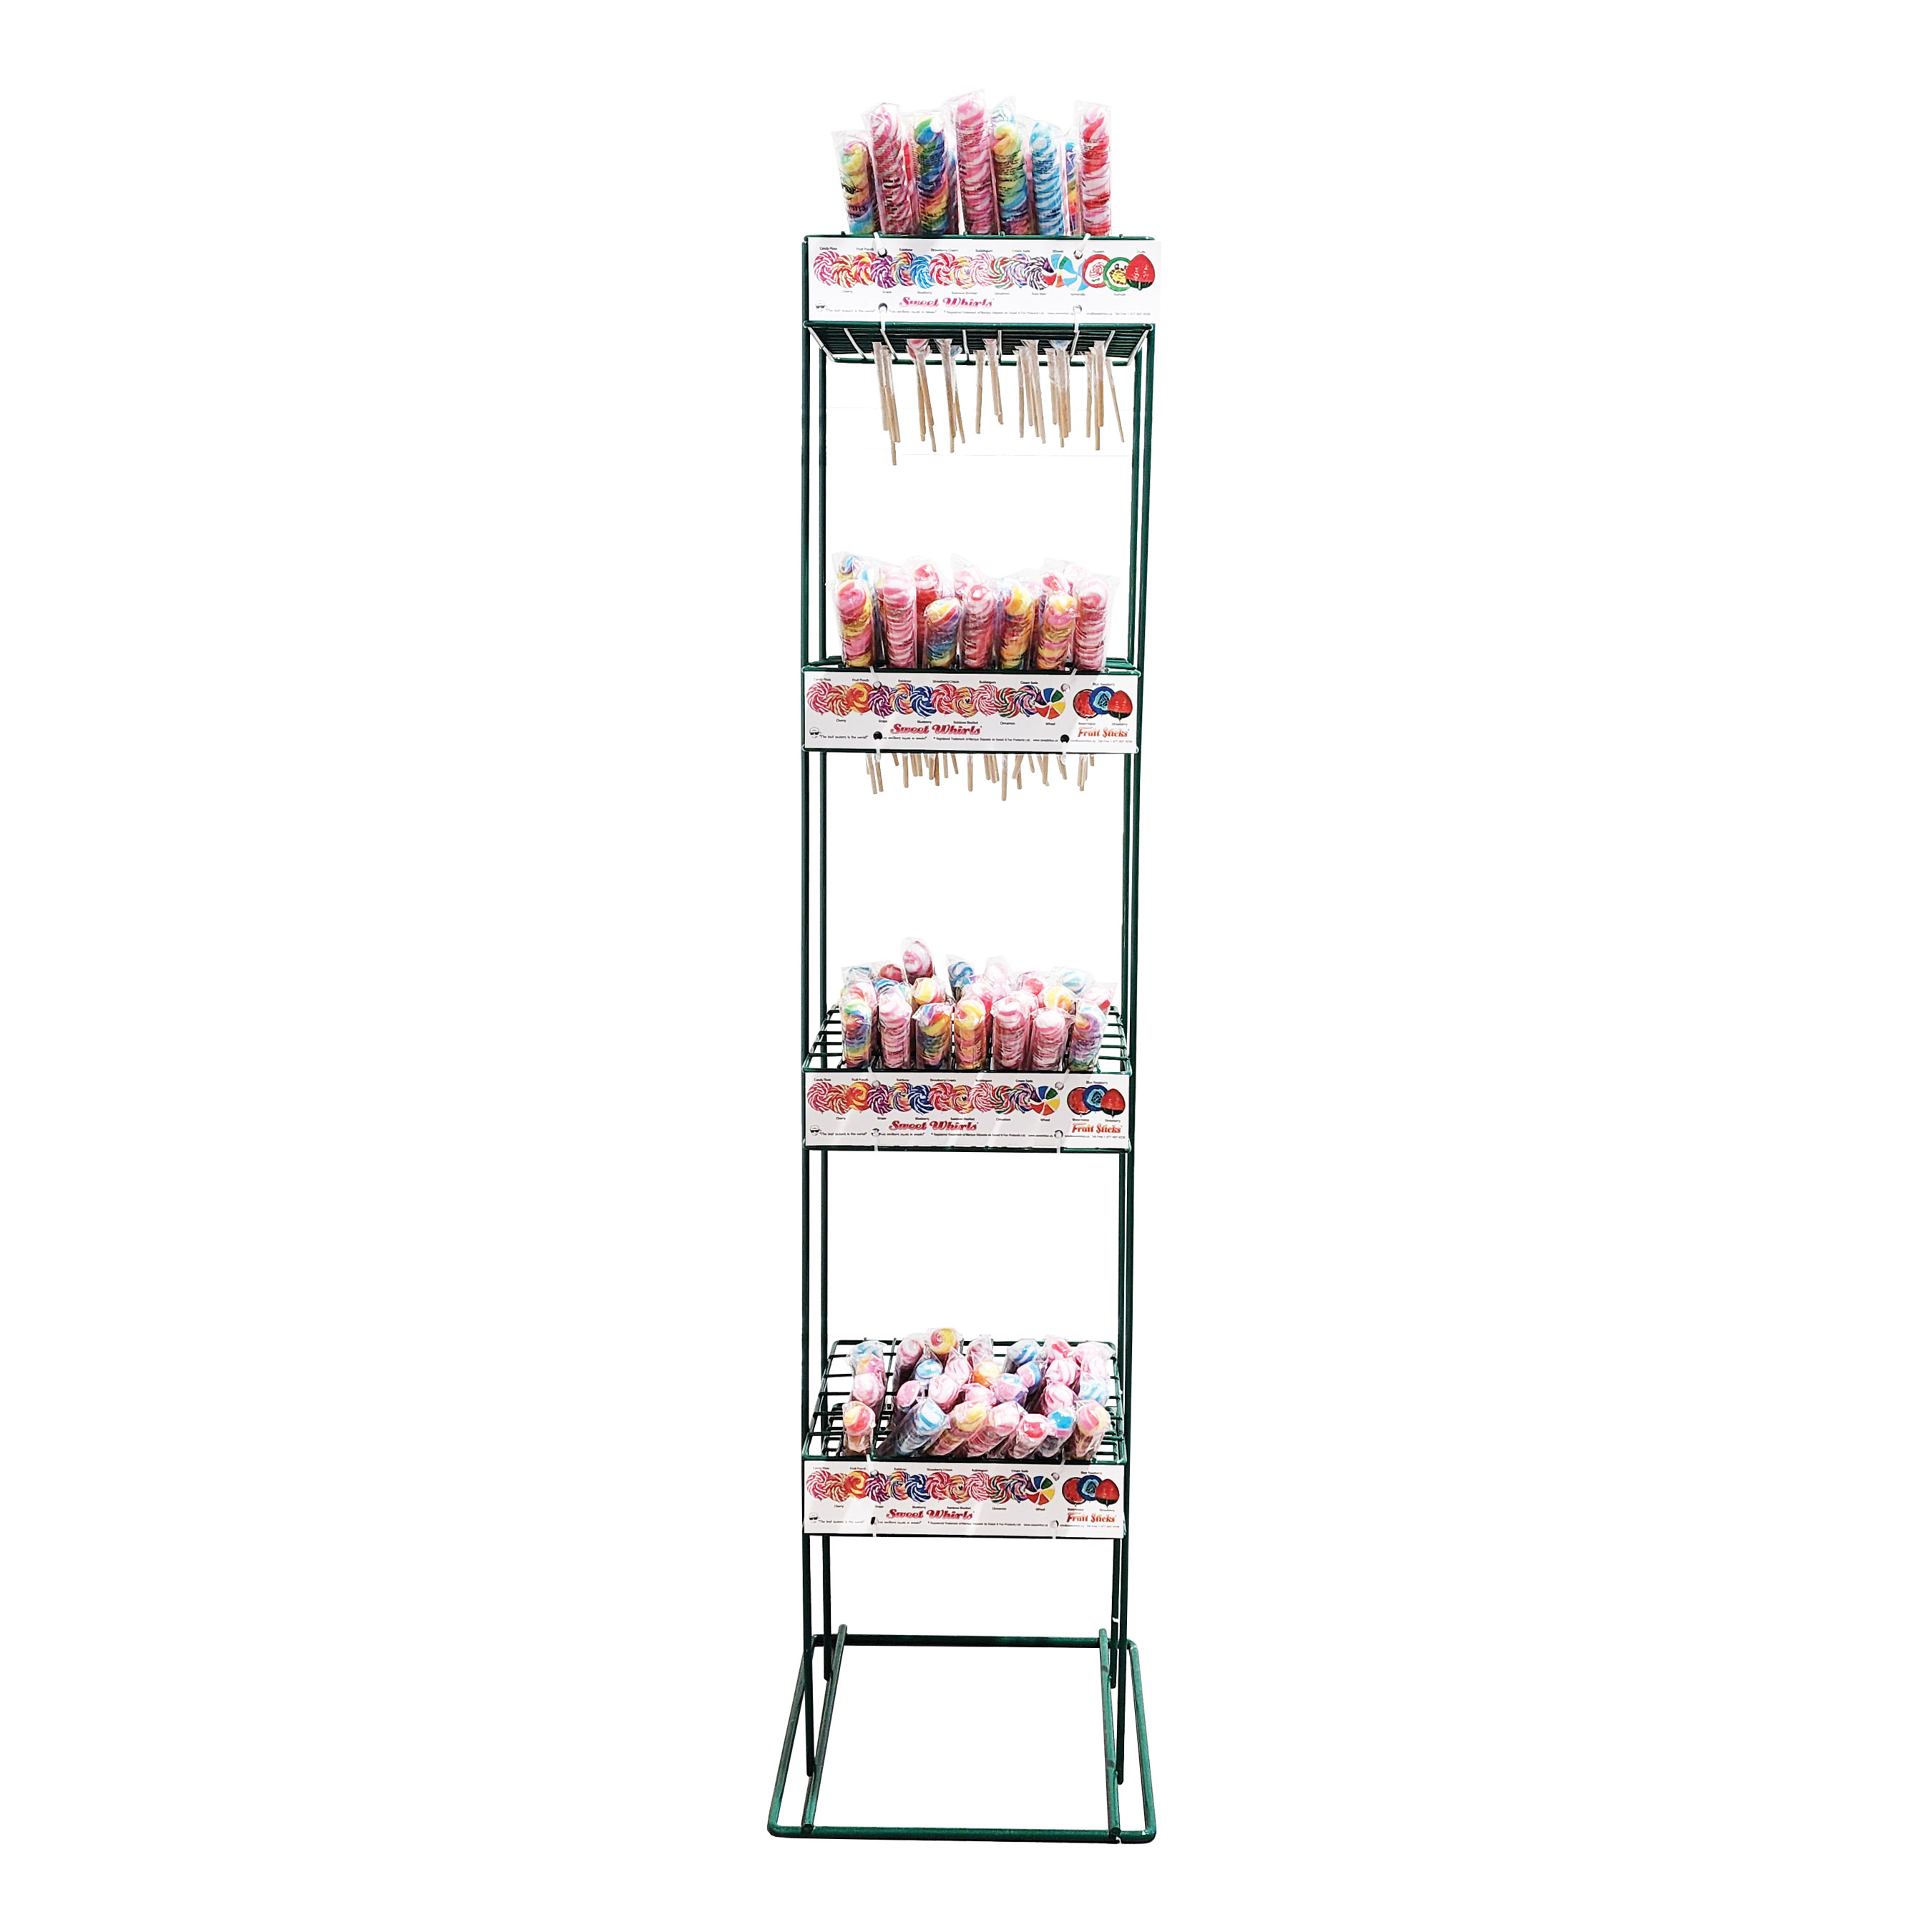 Display methods for your candy. counter top or floor standing. six to choose from